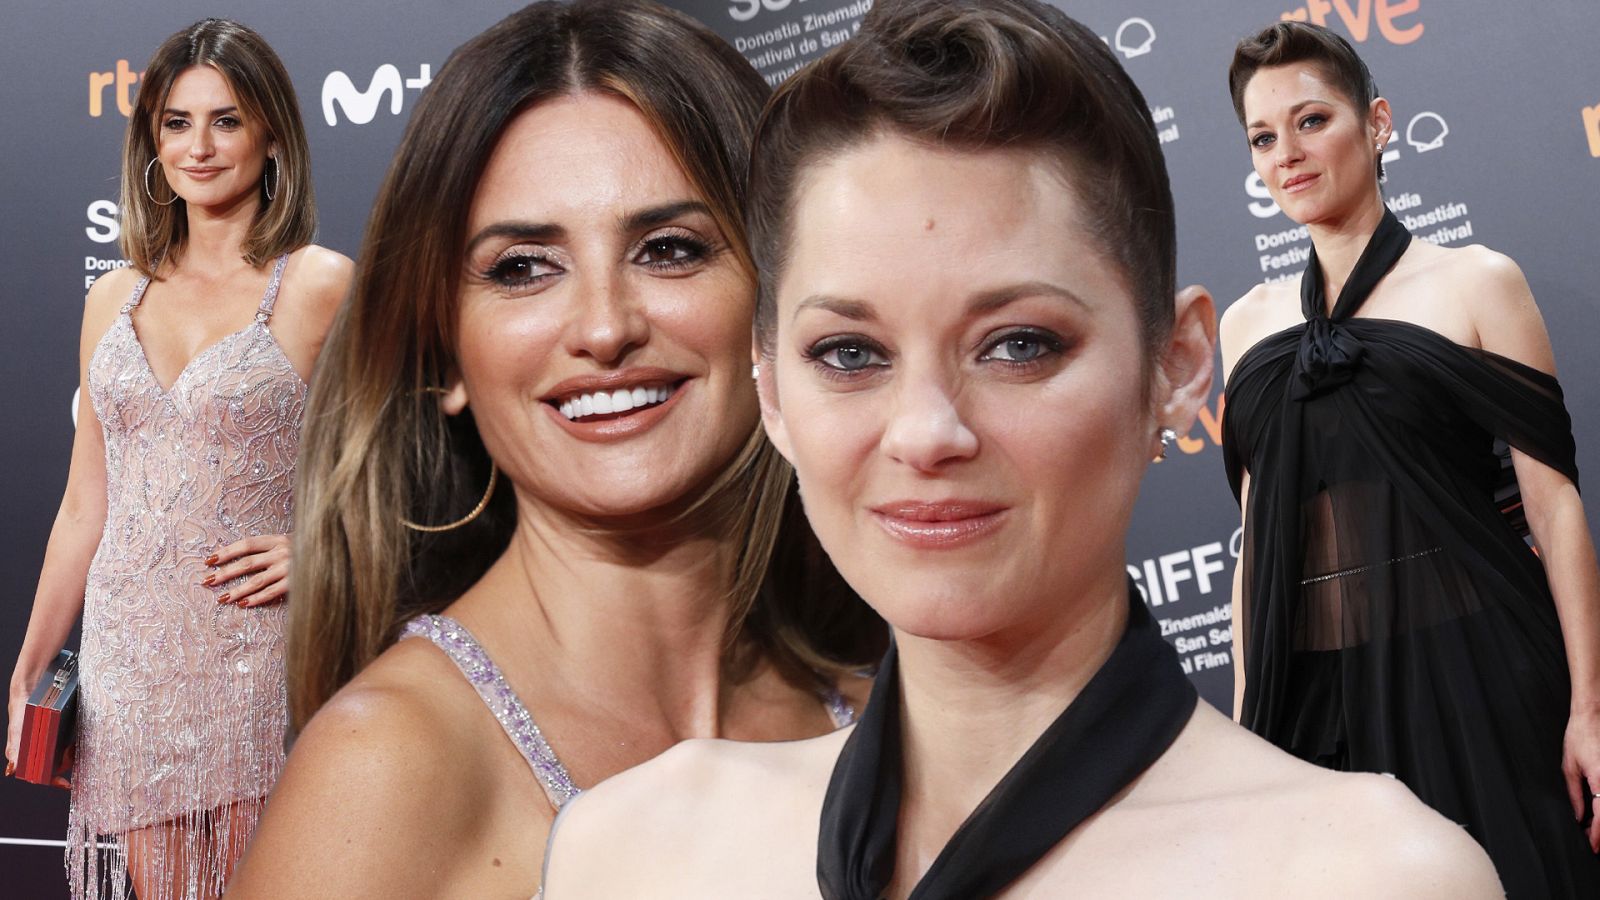 Marion Cotillard and Penélope Cruz, duel of glamor and beauty on the red carpet 